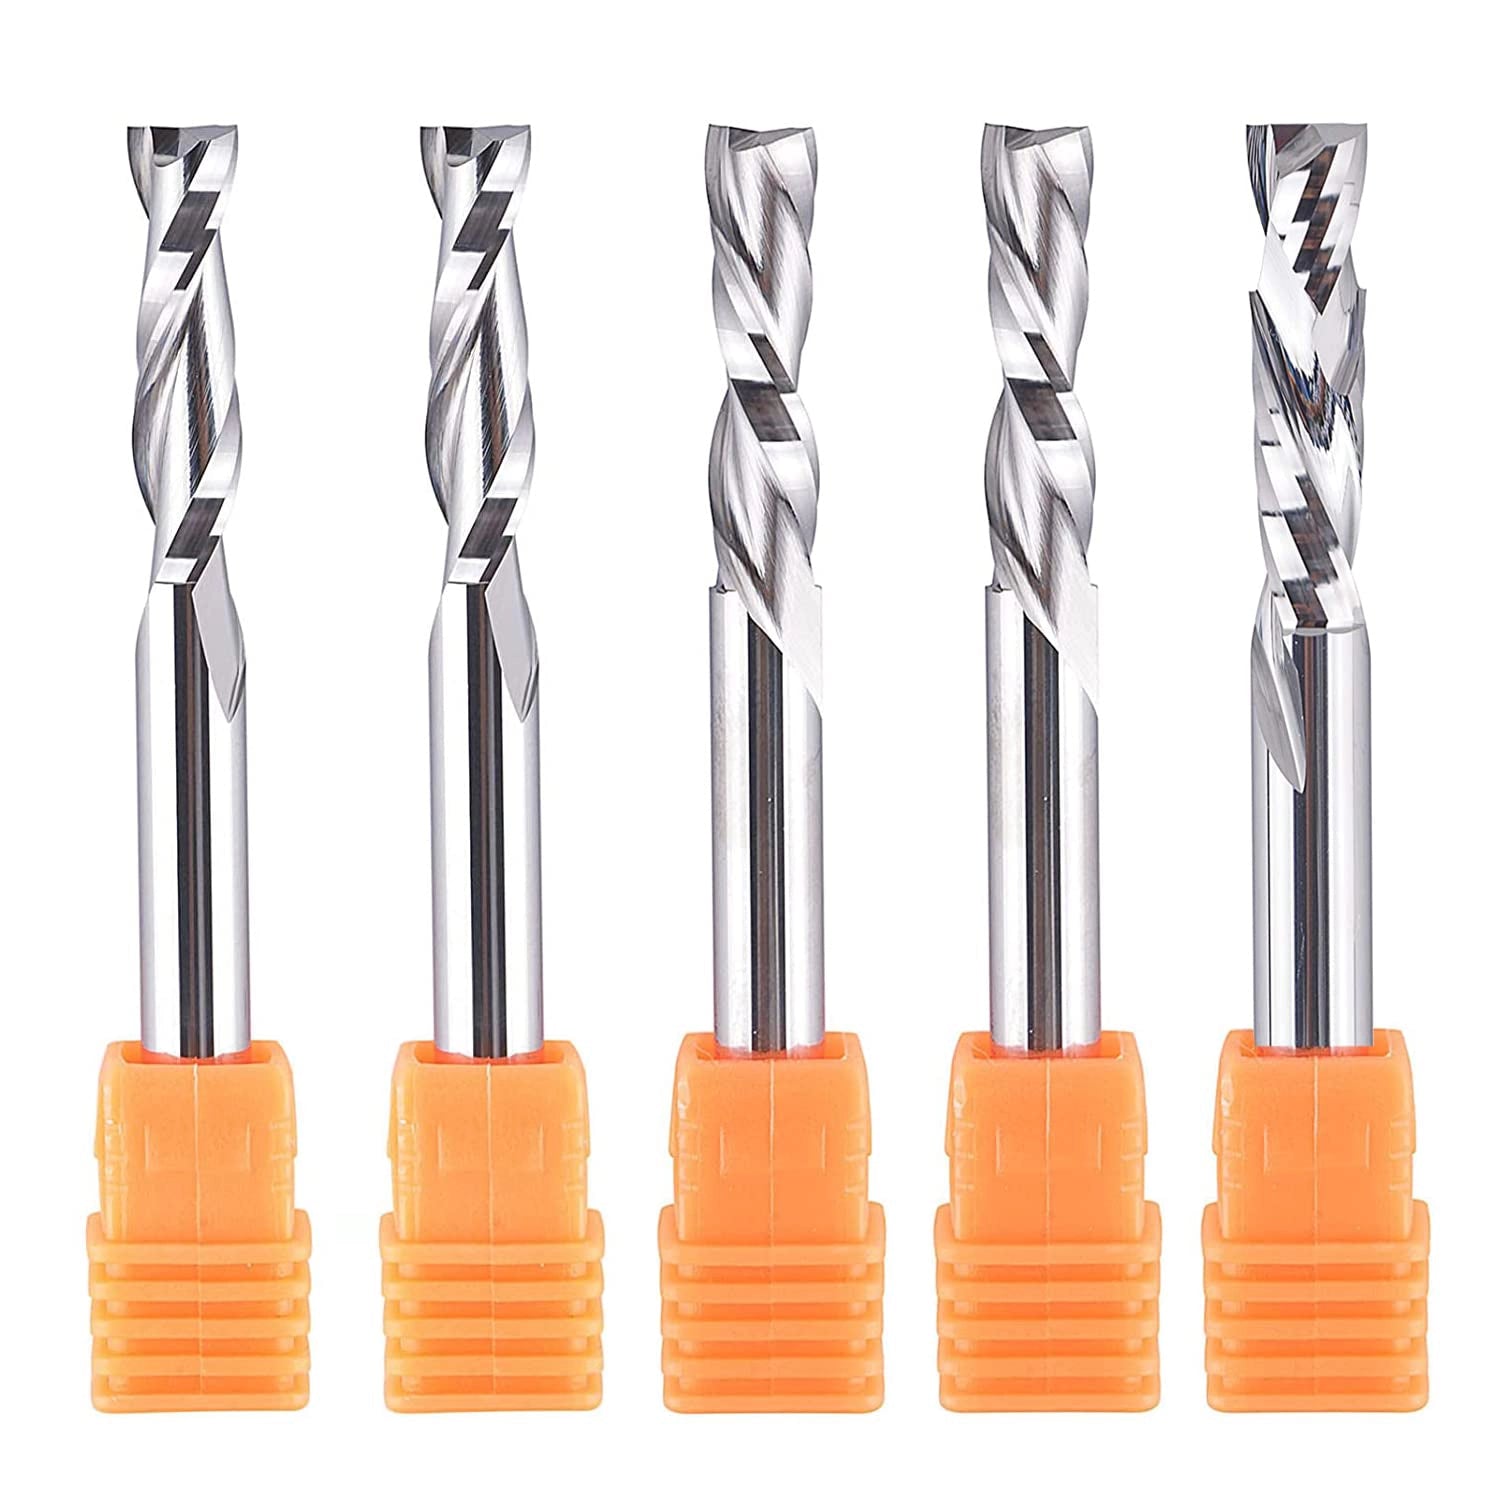 SpeTool WD-4 5Pcs Spiral Router Bits Set 1/4" Shank 1" Cutting Length for Woodworking